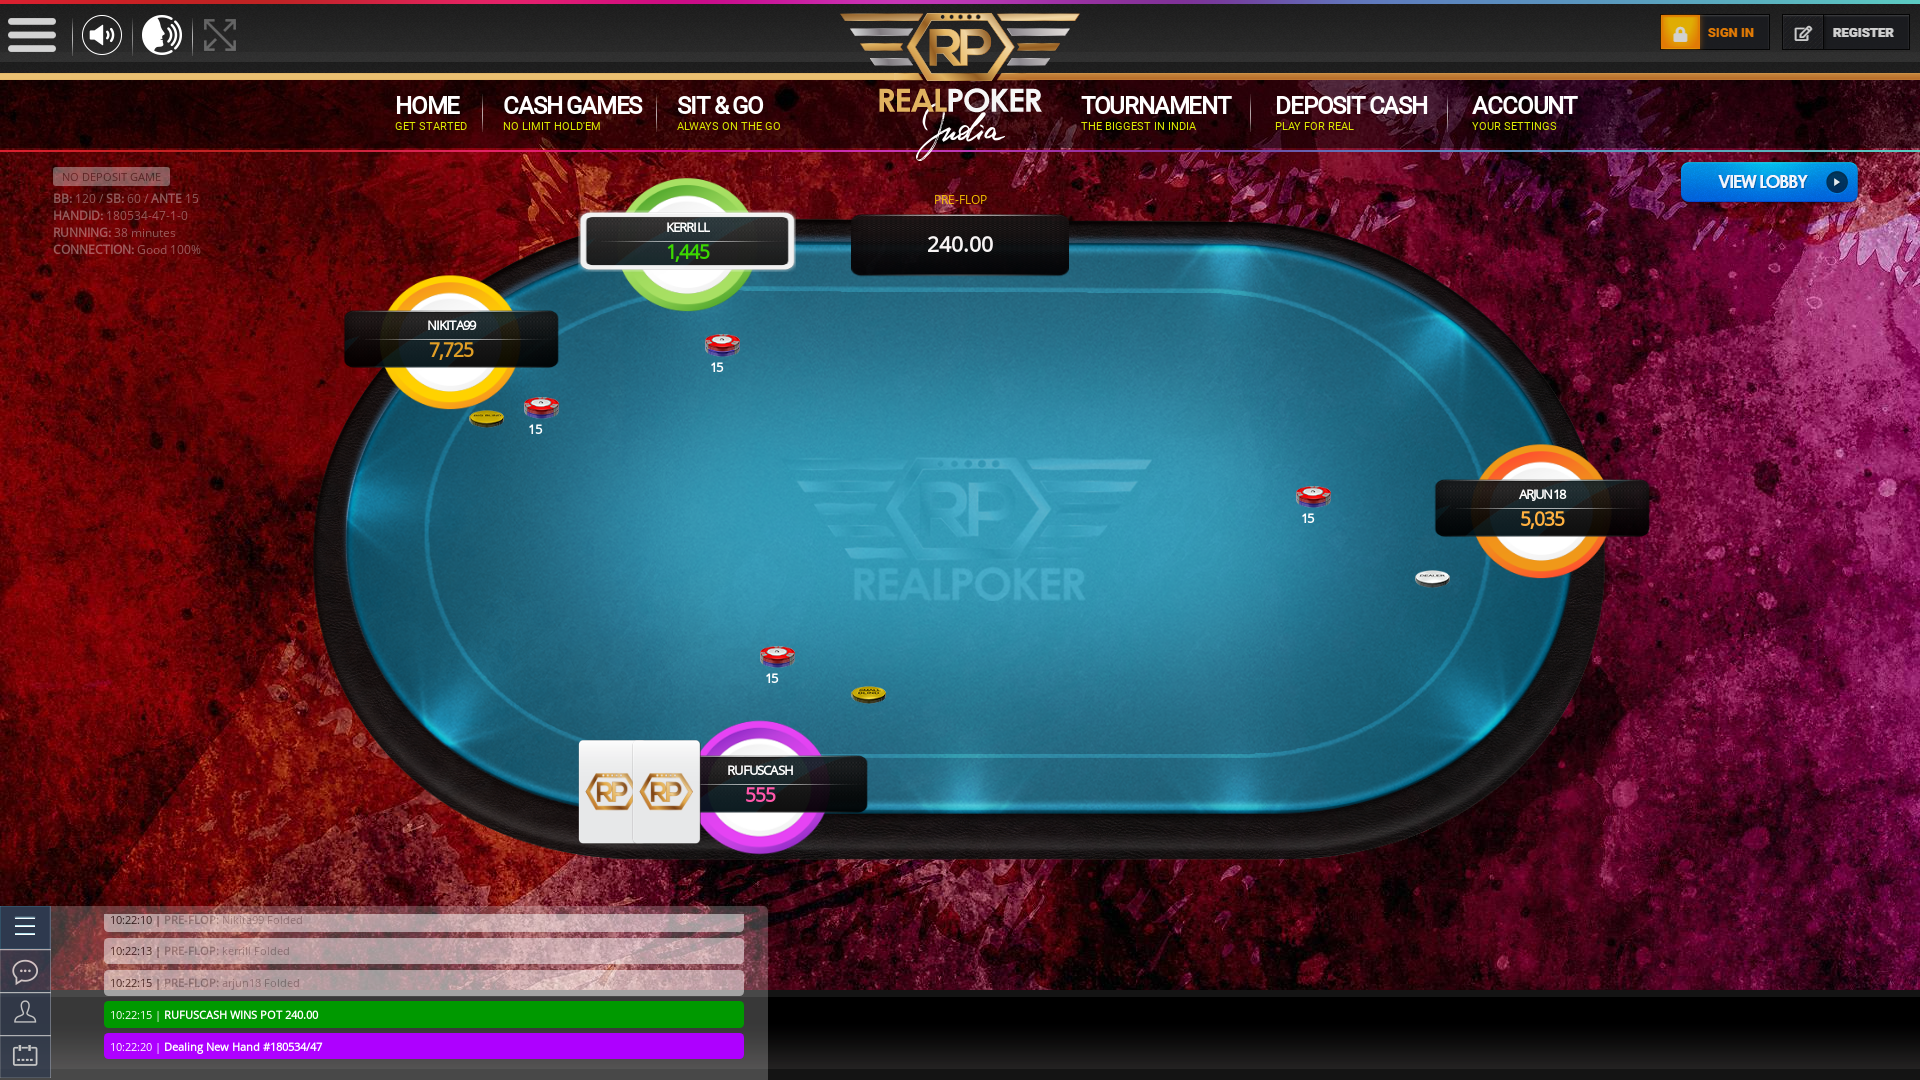 Real Indian poker on a 10 player table in the 38th minute of the game